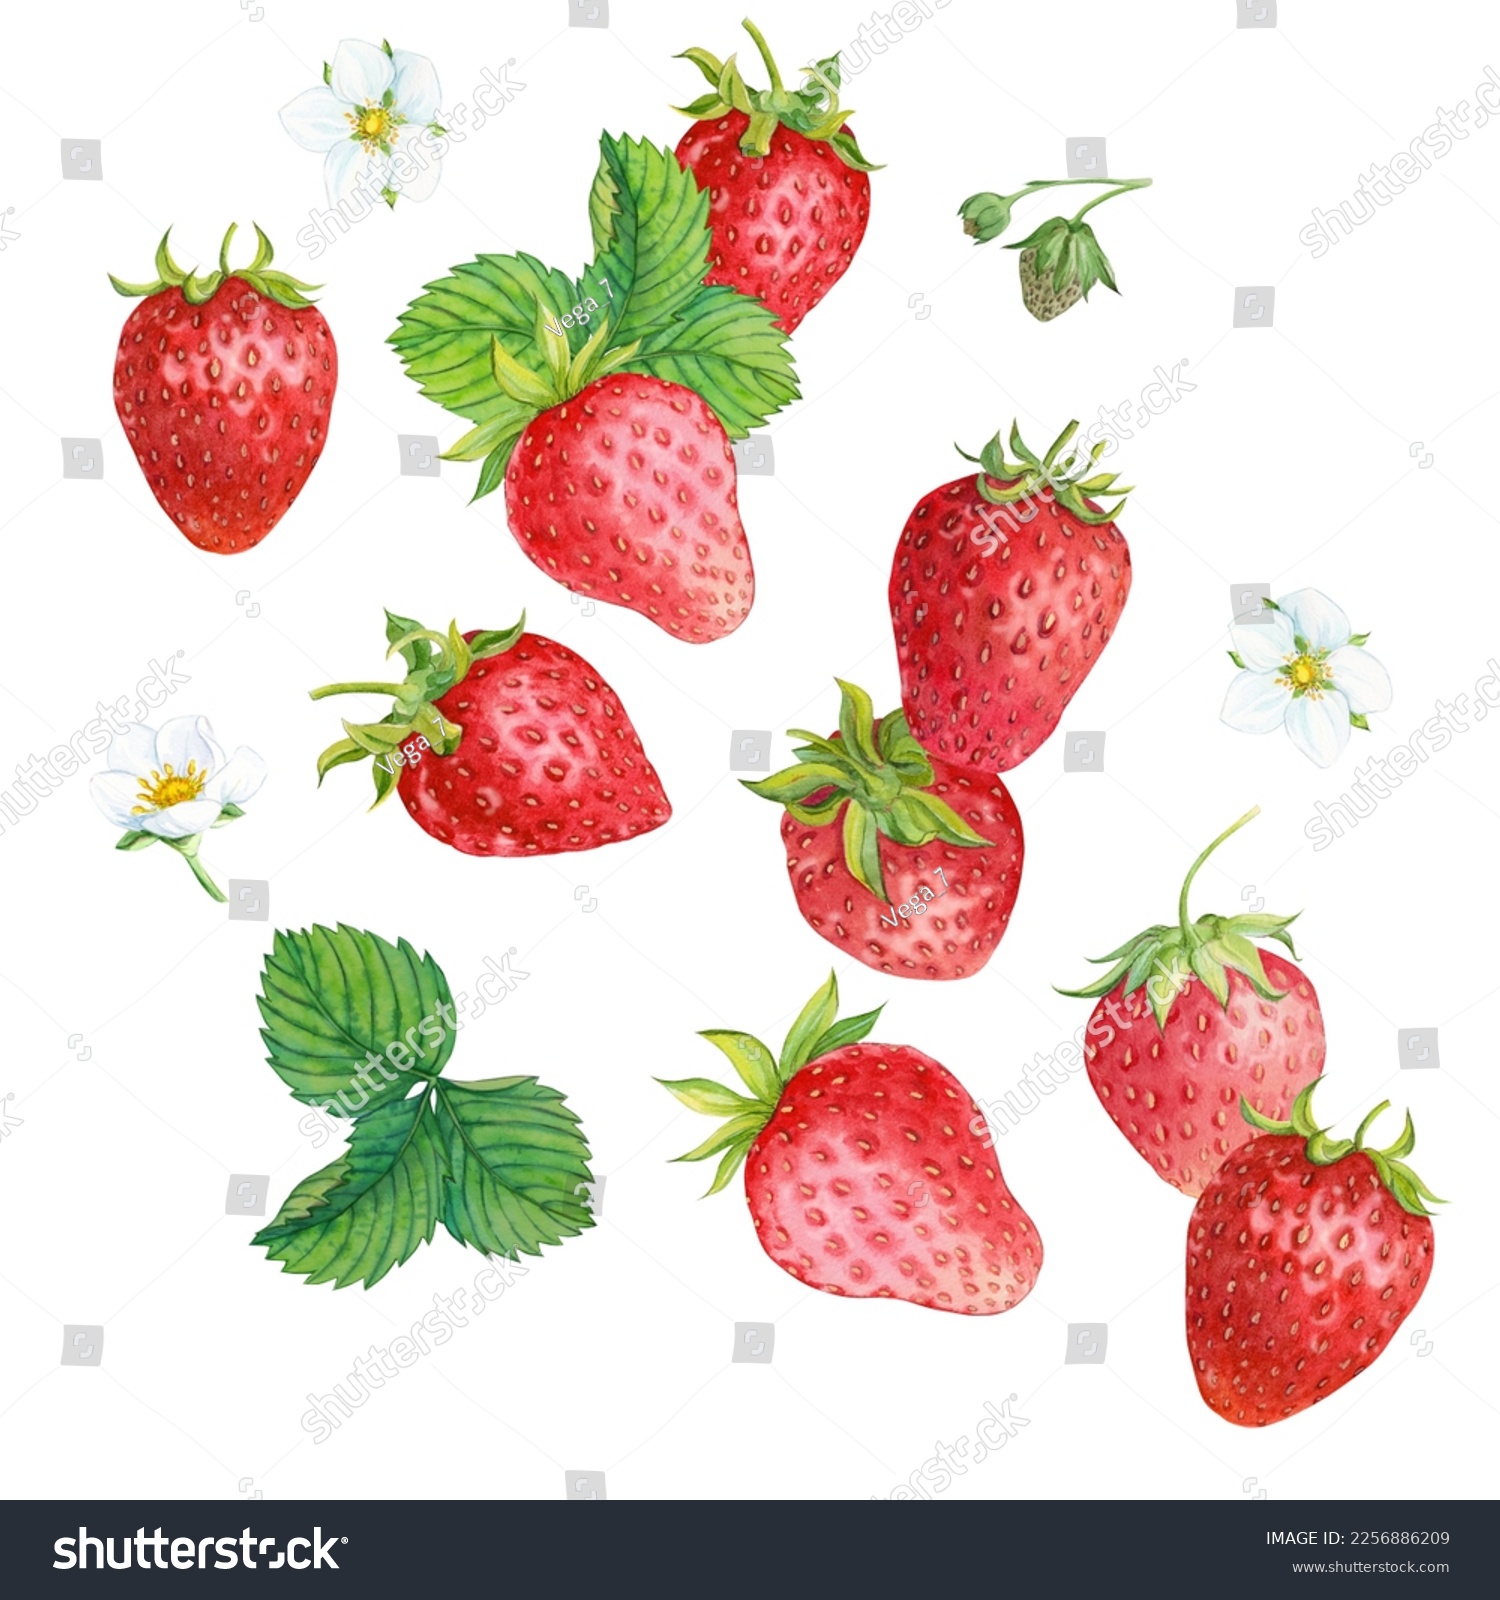 Falling juicy ripe strawberries with green leaves on a white background. Watercolor illustration for advertising juices, desserts, pastries. #2256886209